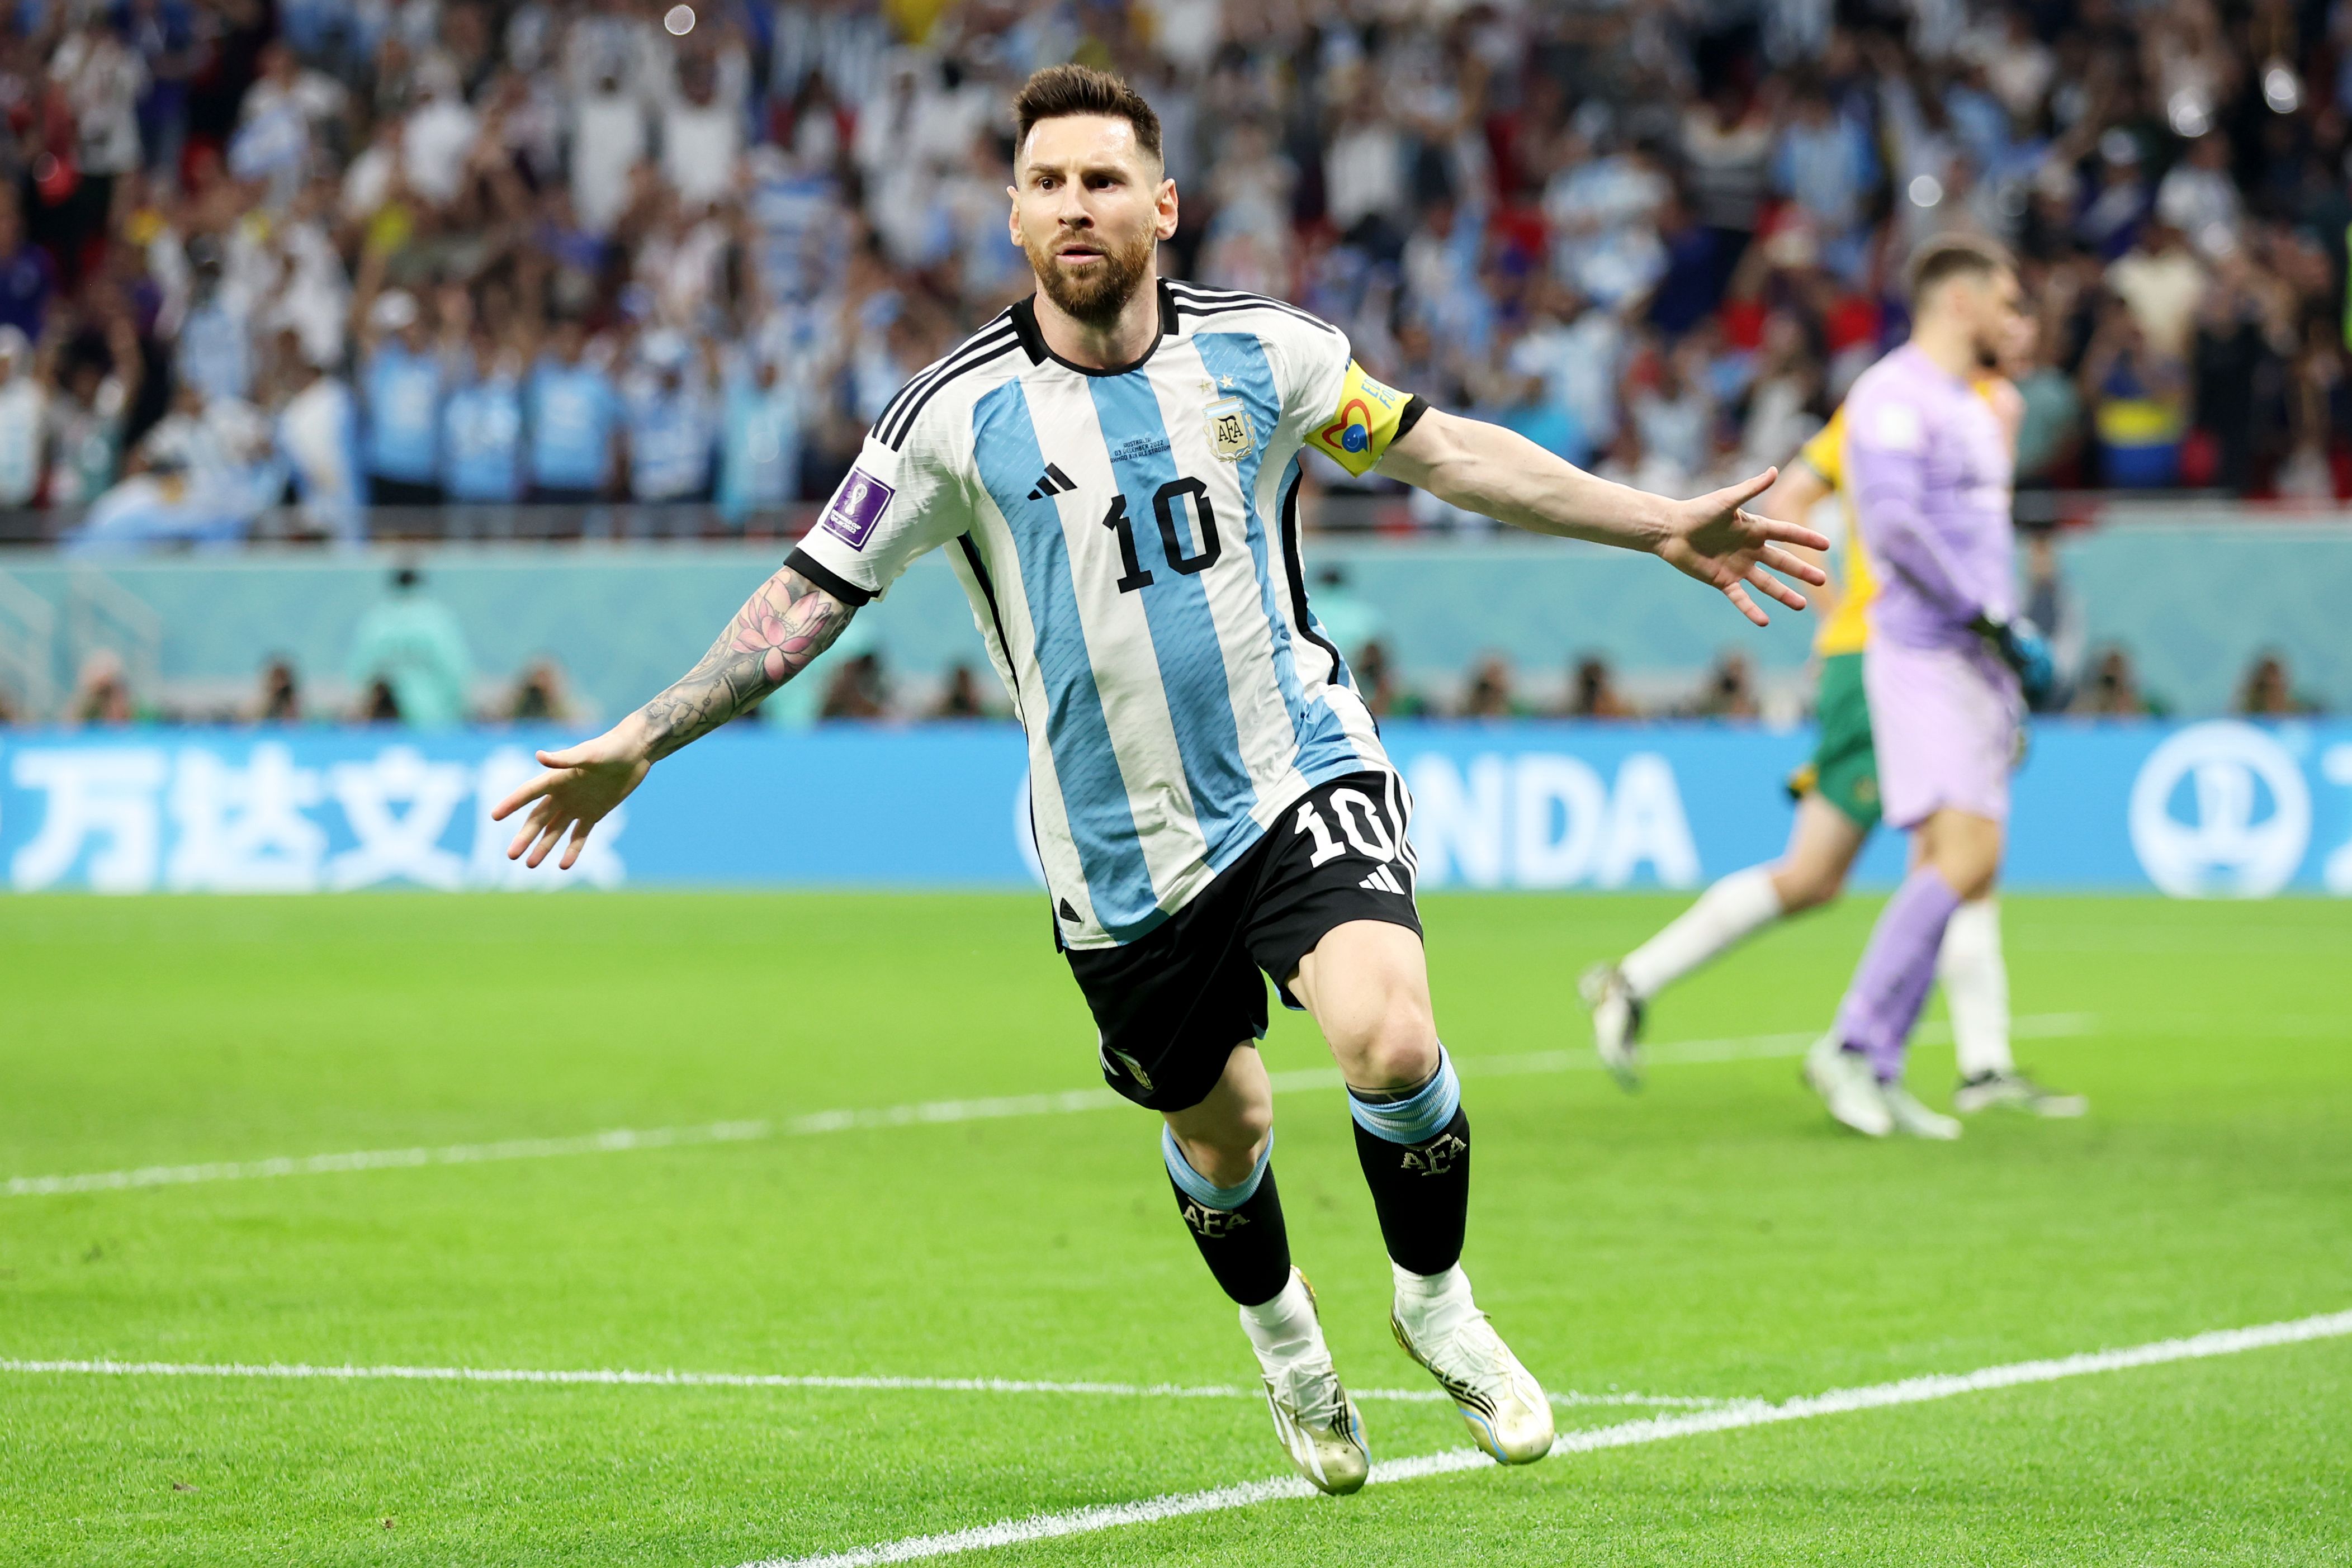 Lionel Messi scores in 1000th career game as Argentina reaches World Cup quarterfinals | CNN